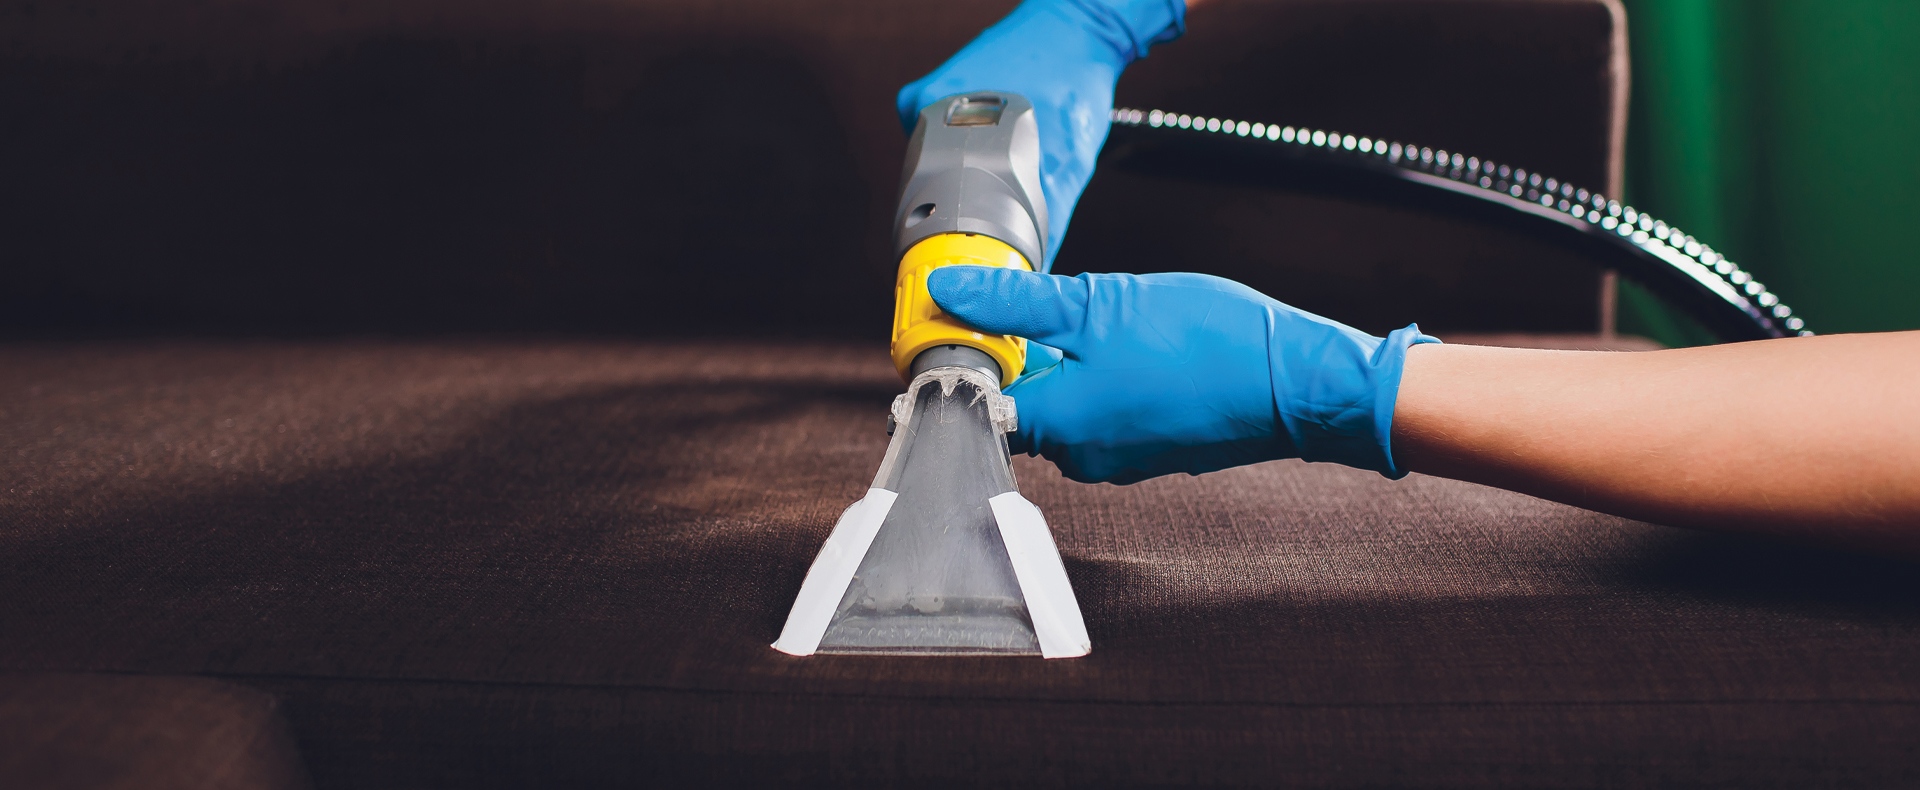 Upholstery Cleaning Service Near Highlands Ranch, Denver, and Surrounding Areas